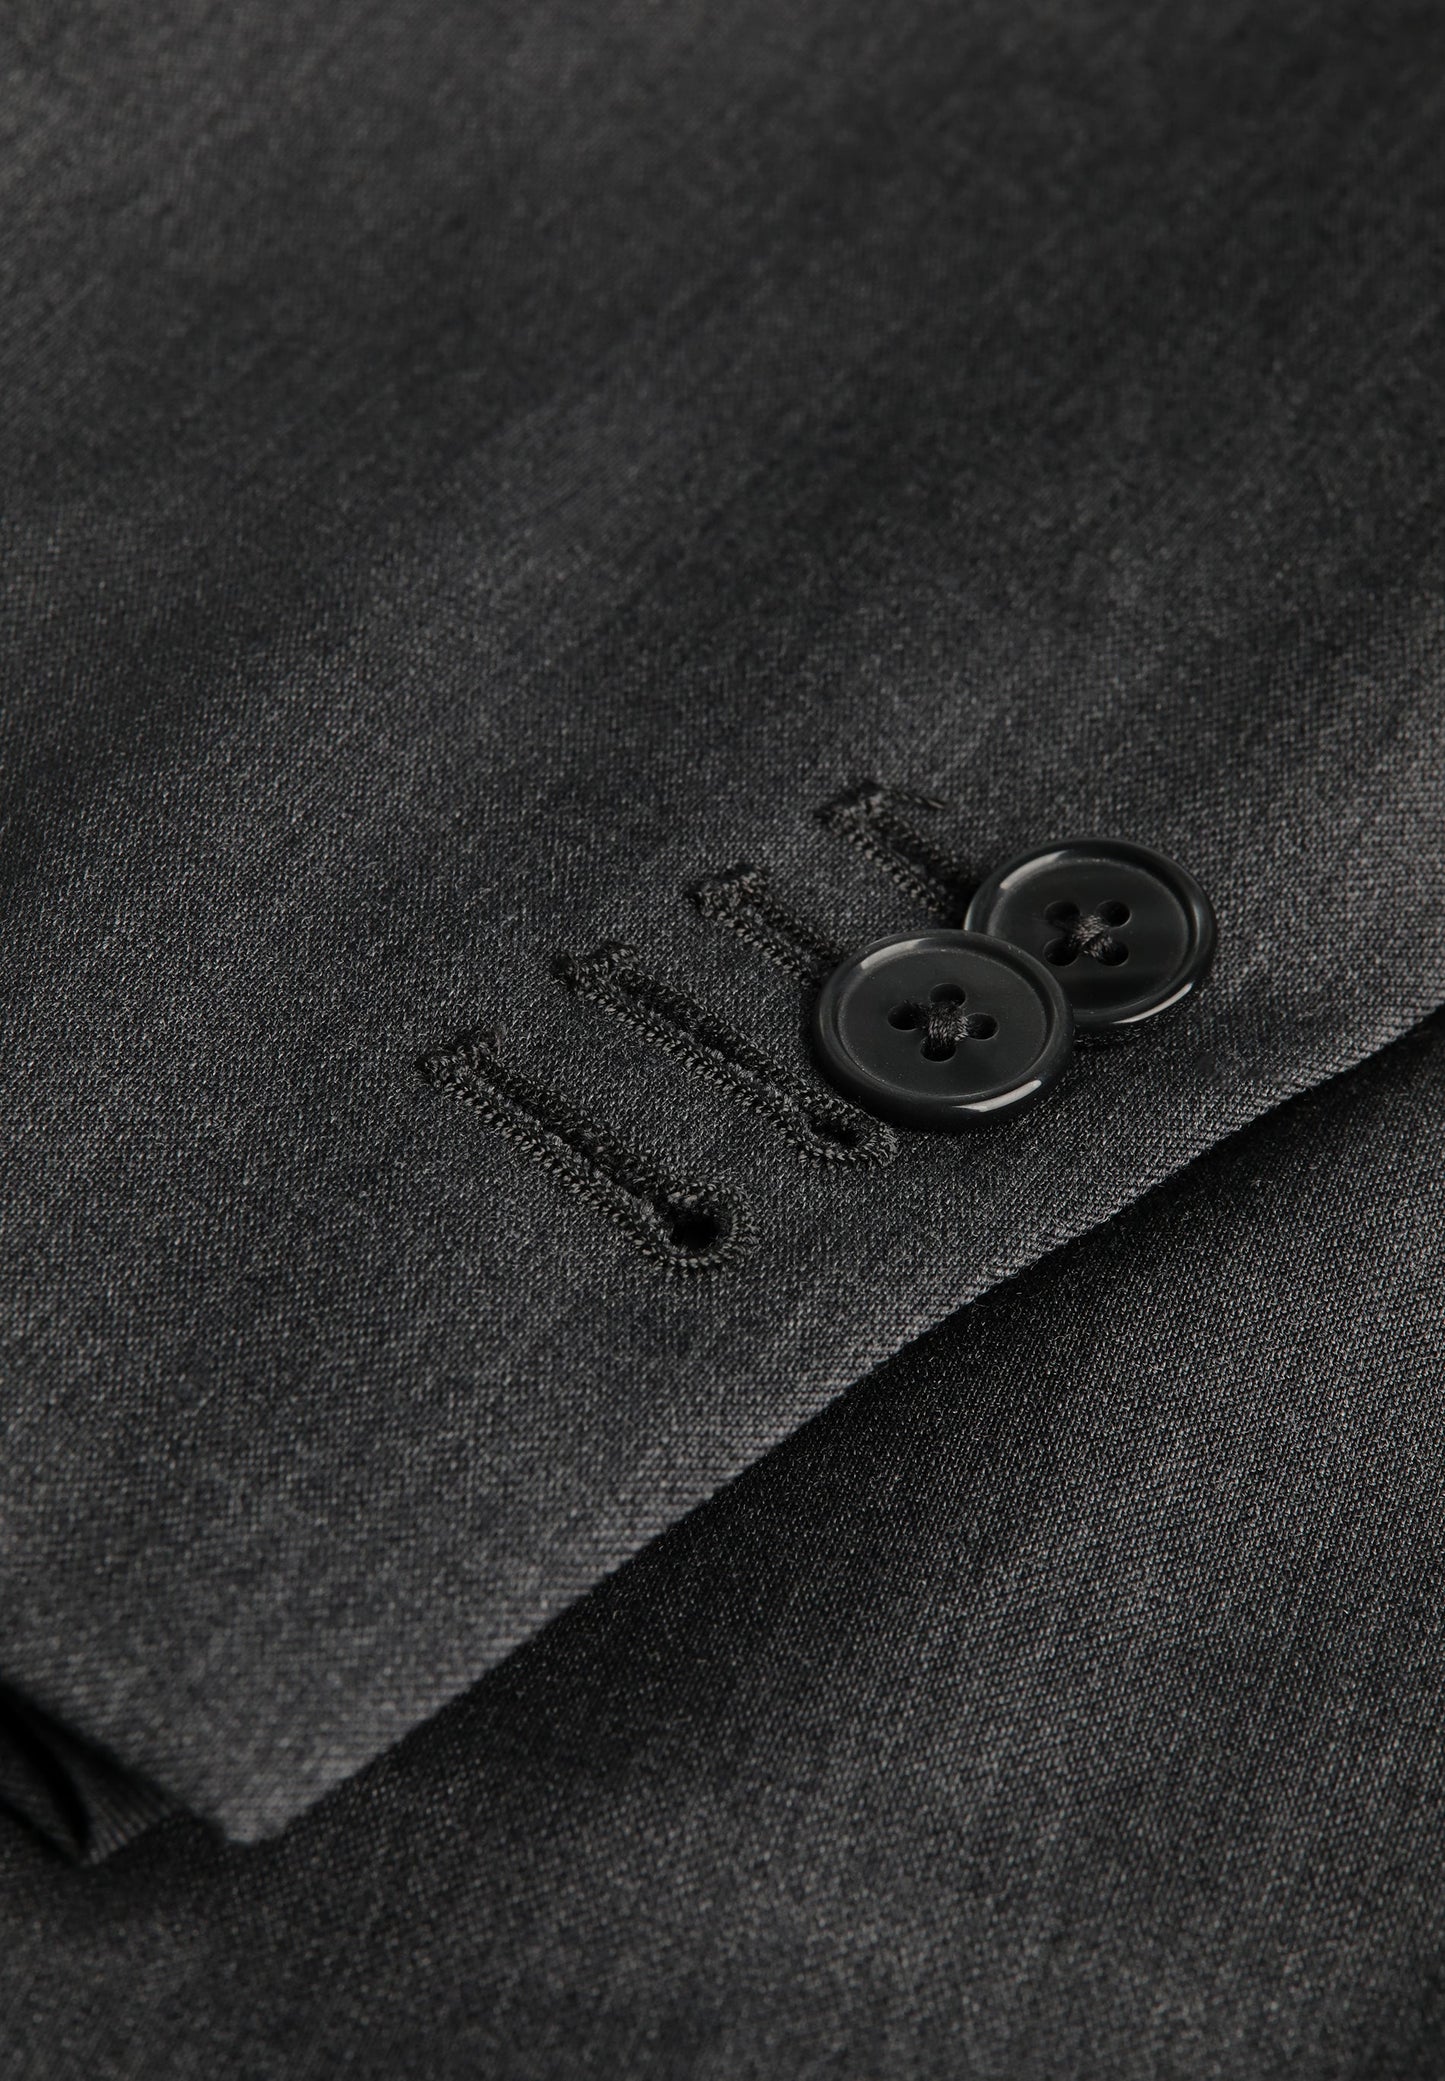 GREY WOOL STRUCTURE SUIT